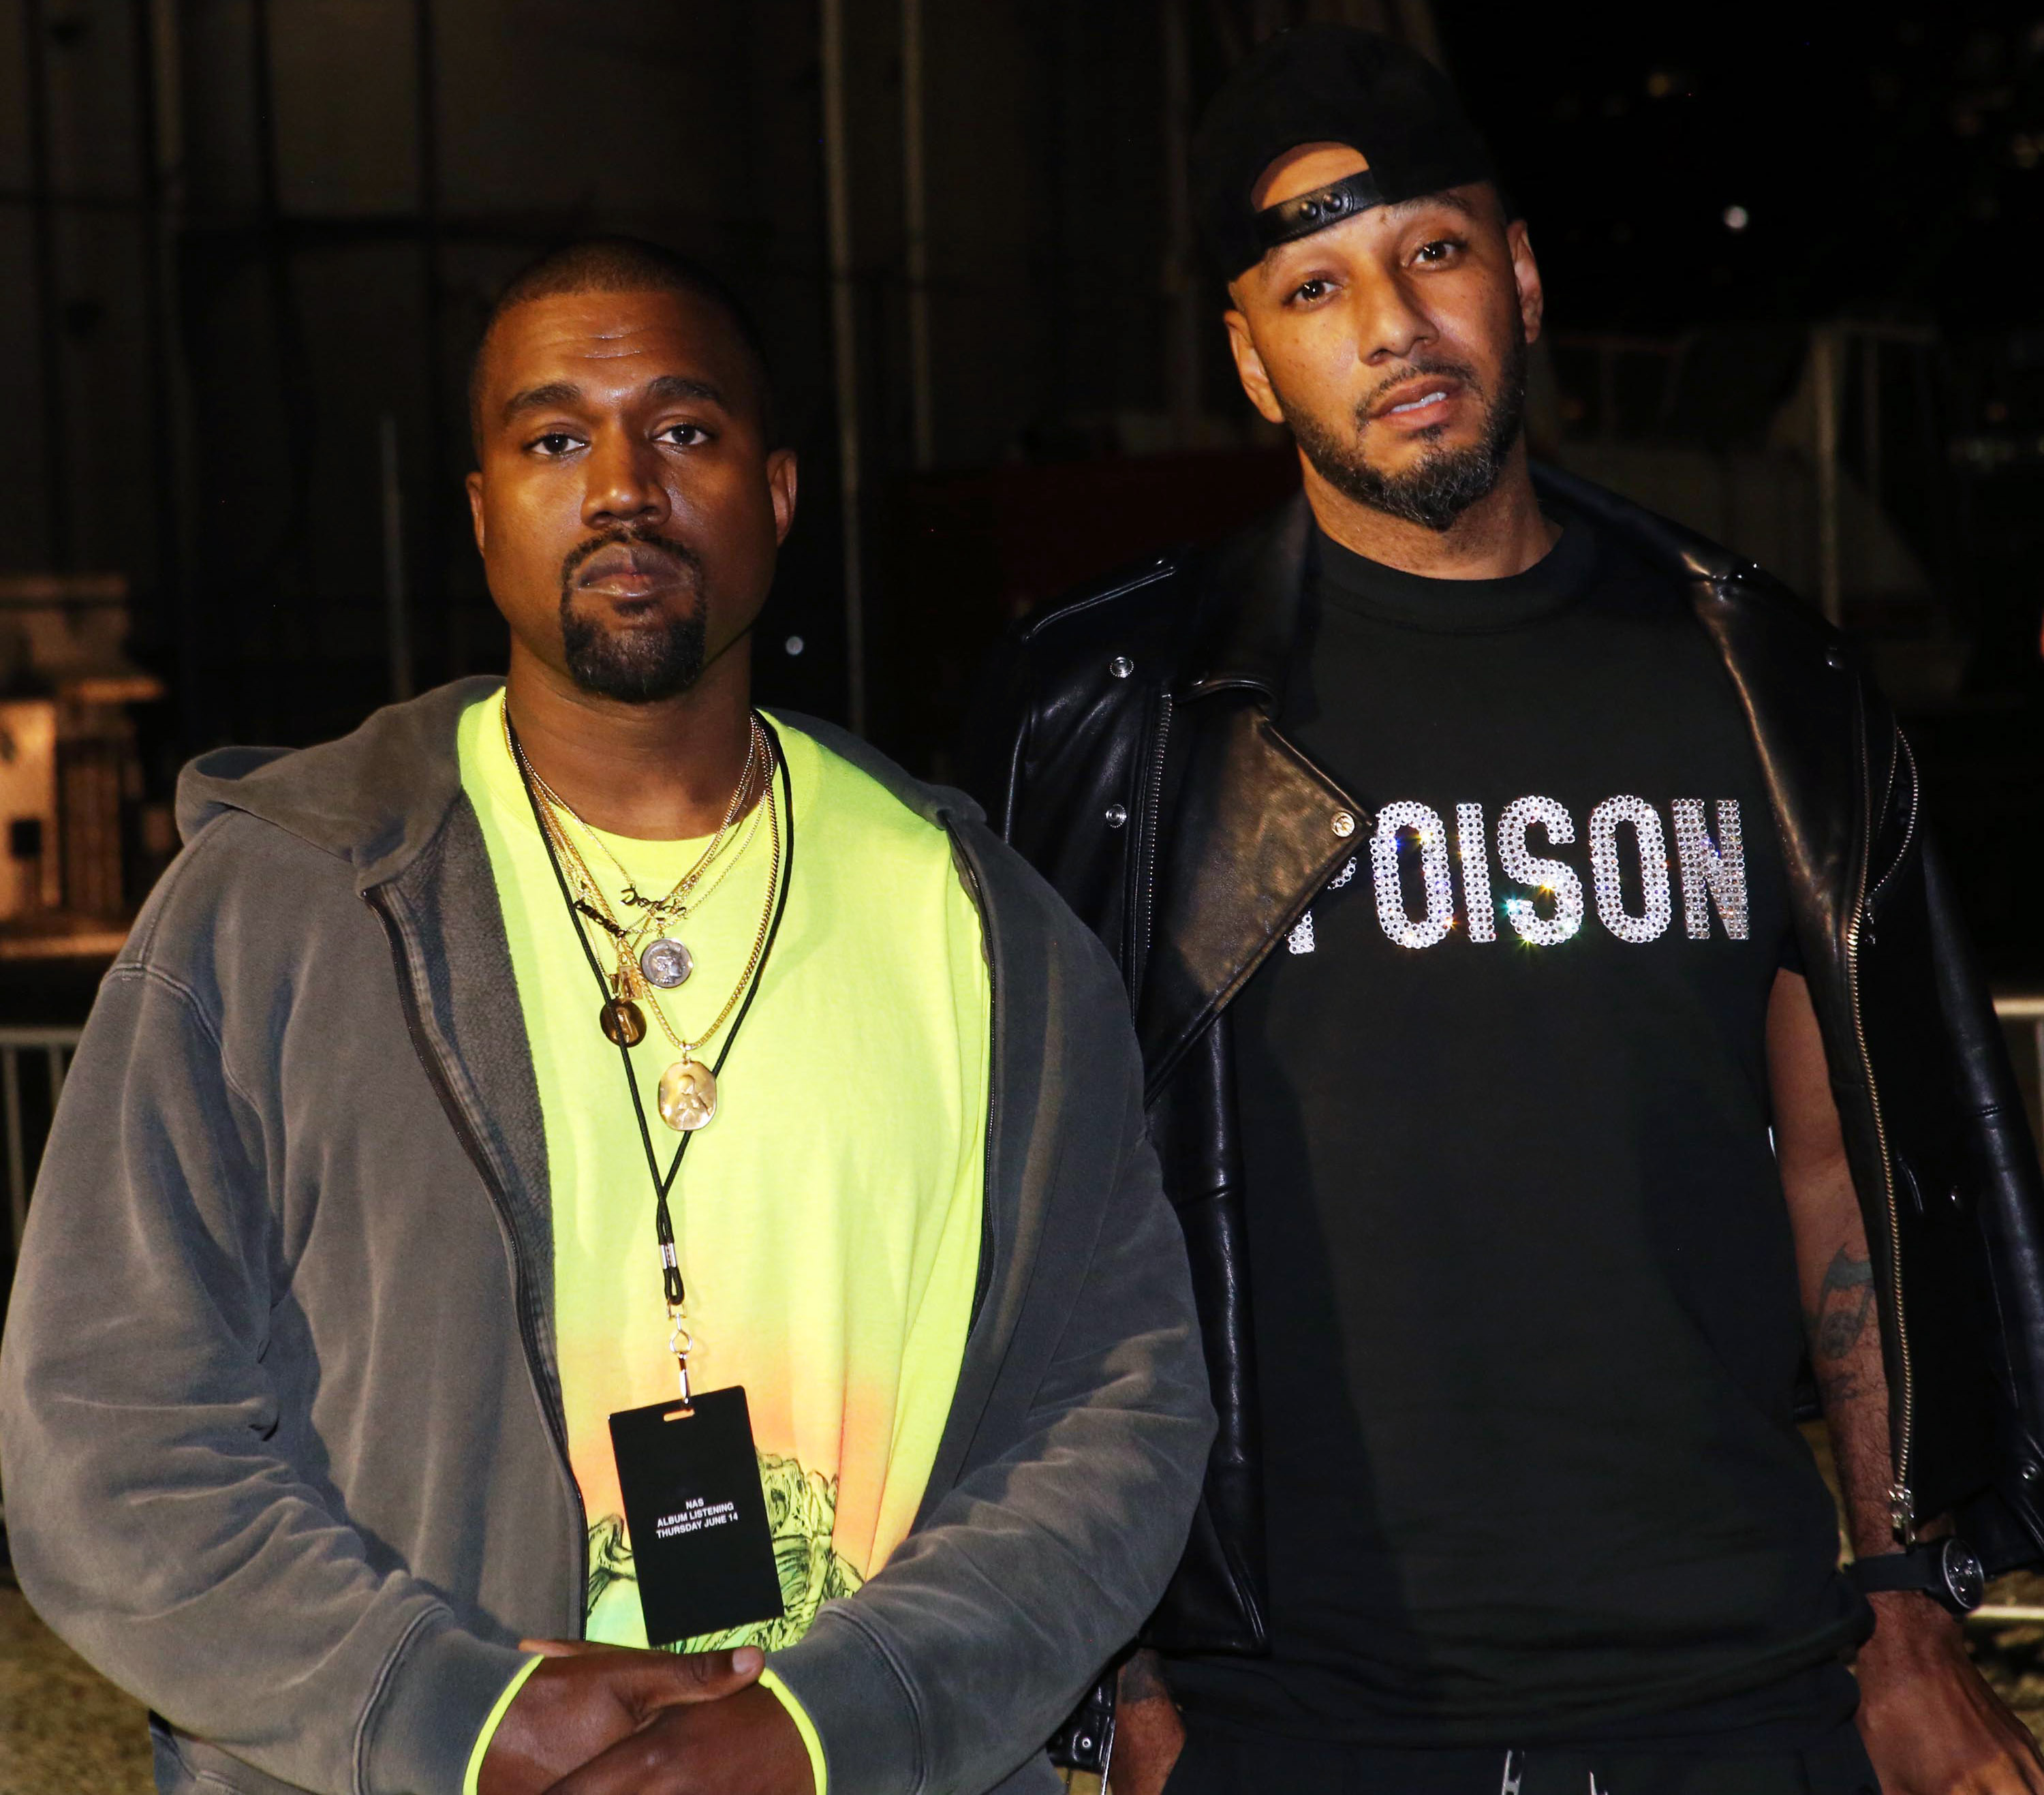 Swizz Beatz Calls Kanye West’s Addition To DMX Memorial A “Genuine Act Of Love”